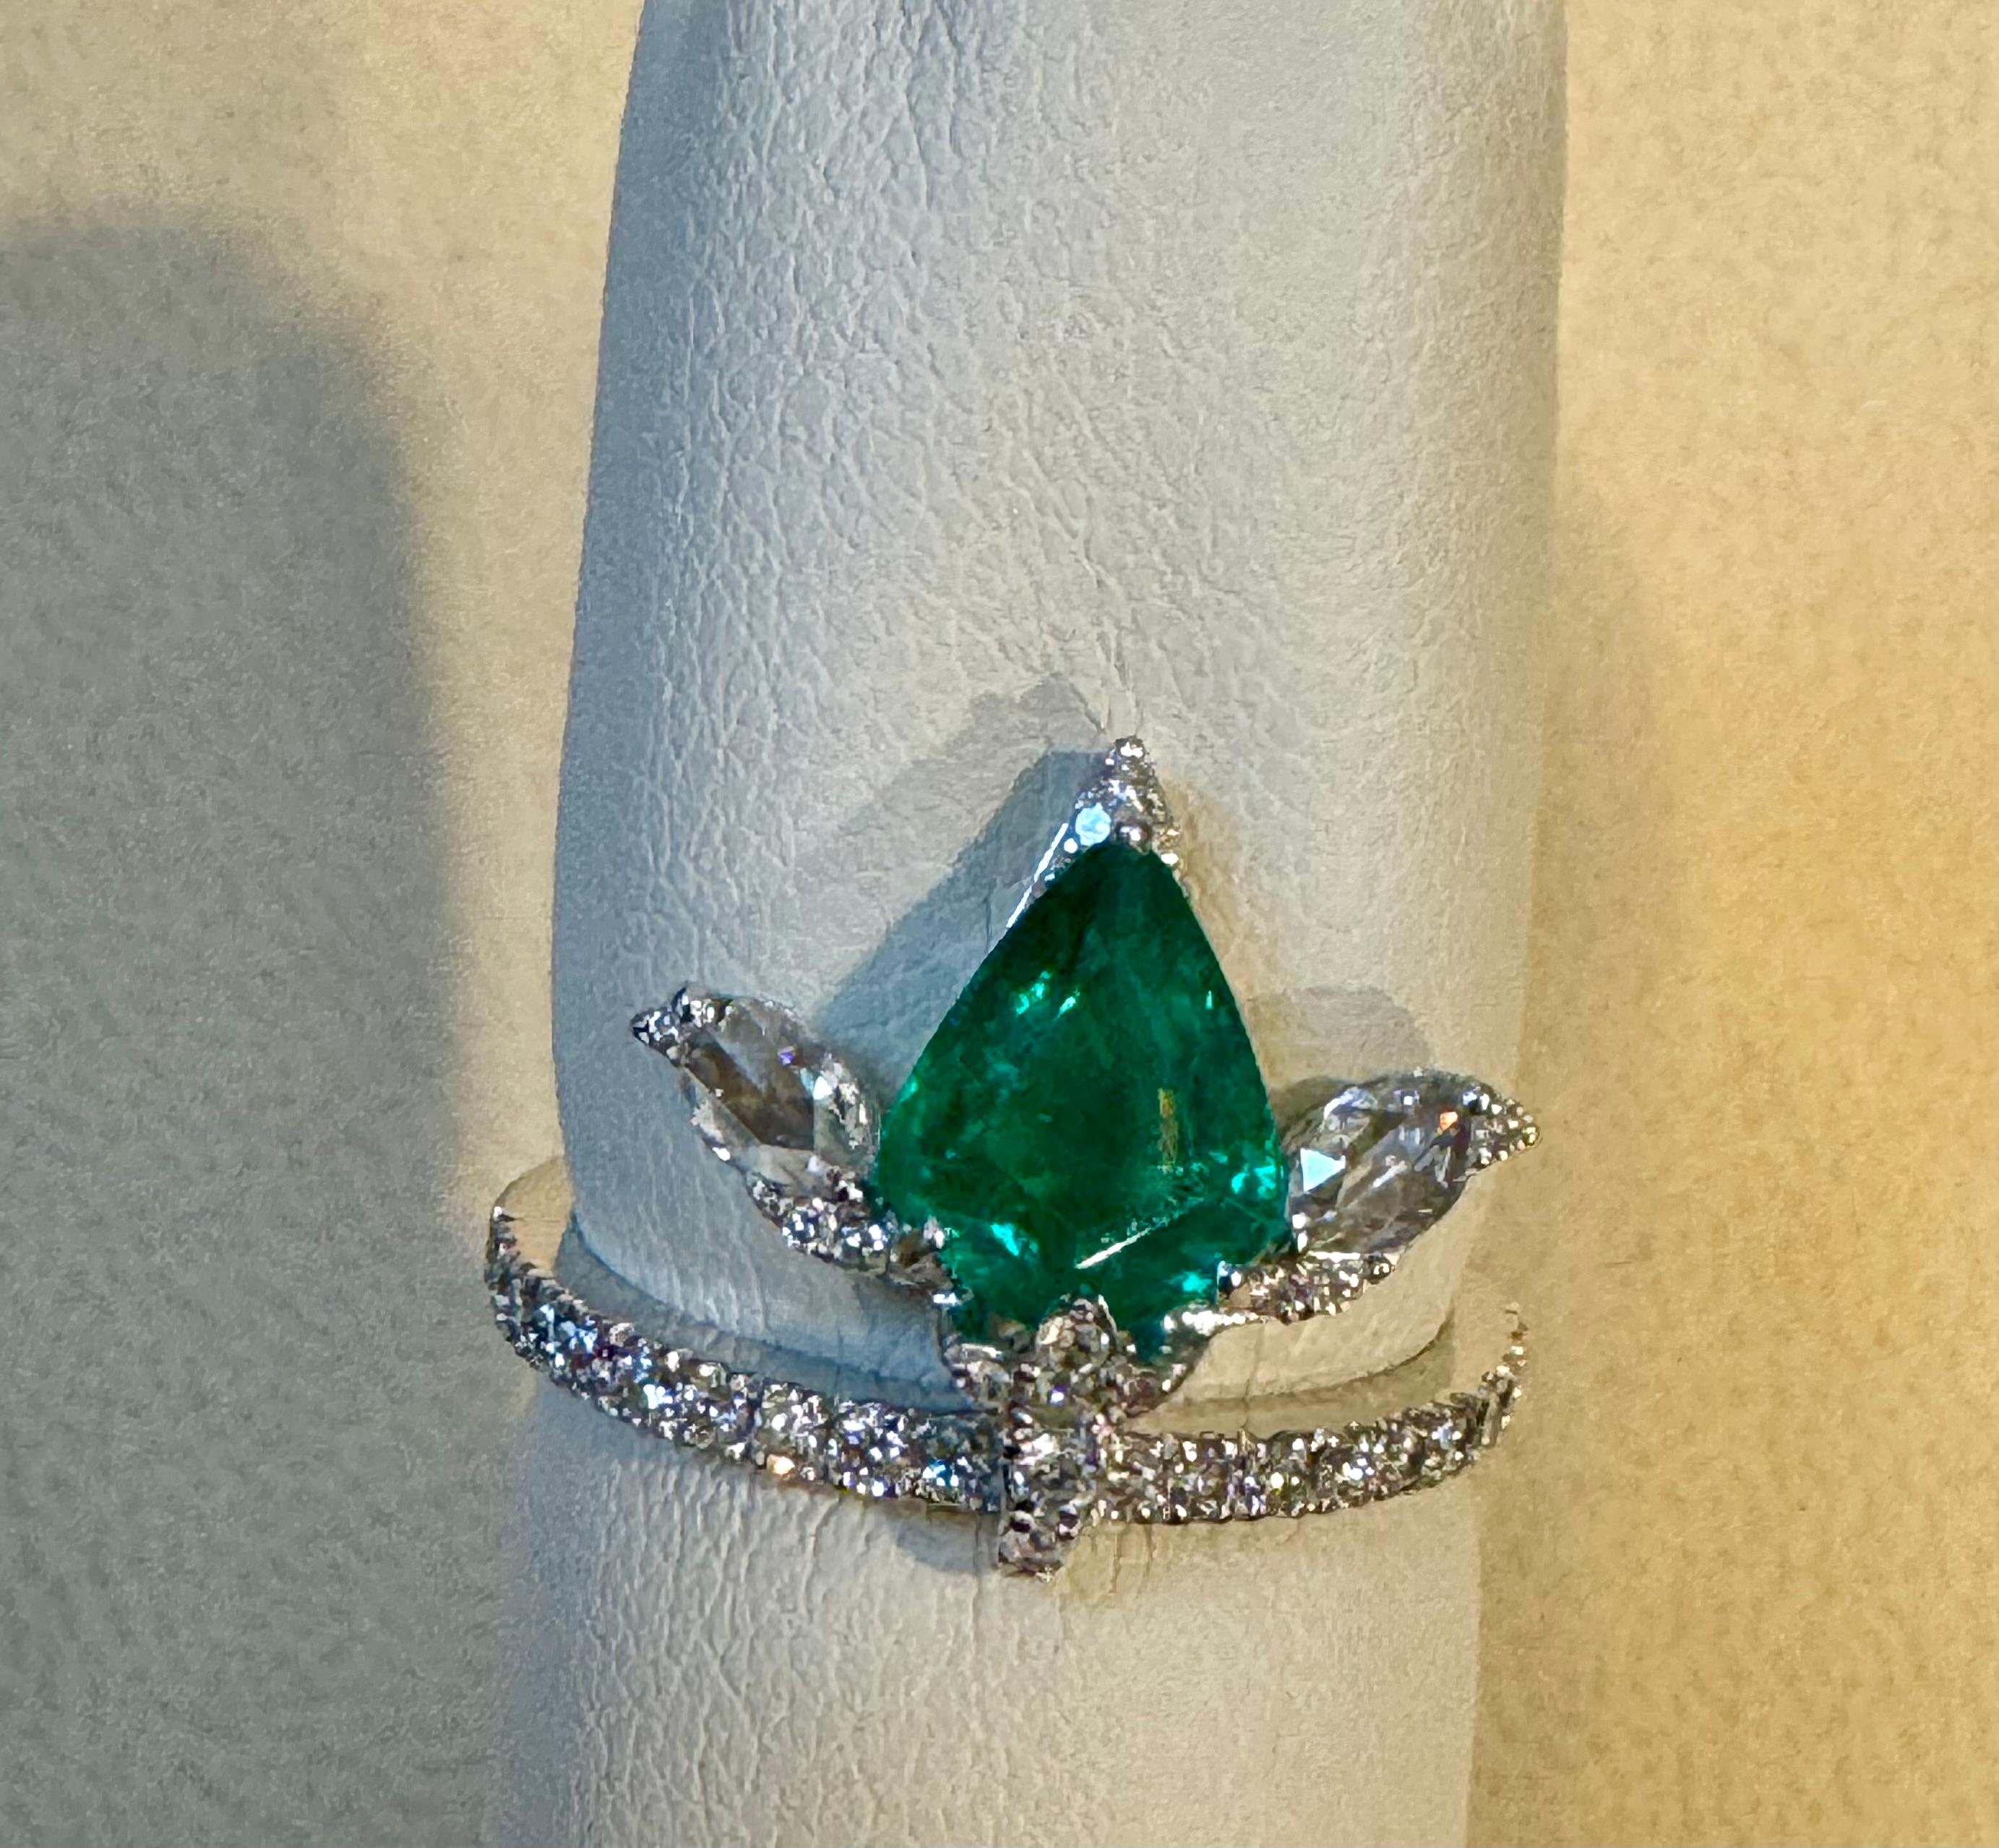 1.2 Ct Finest Zambian Pear Emerald & 1 Ct Diamond Ring in 18 Kt Gold Size 6.5 In Excellent Condition For Sale In New York, NY